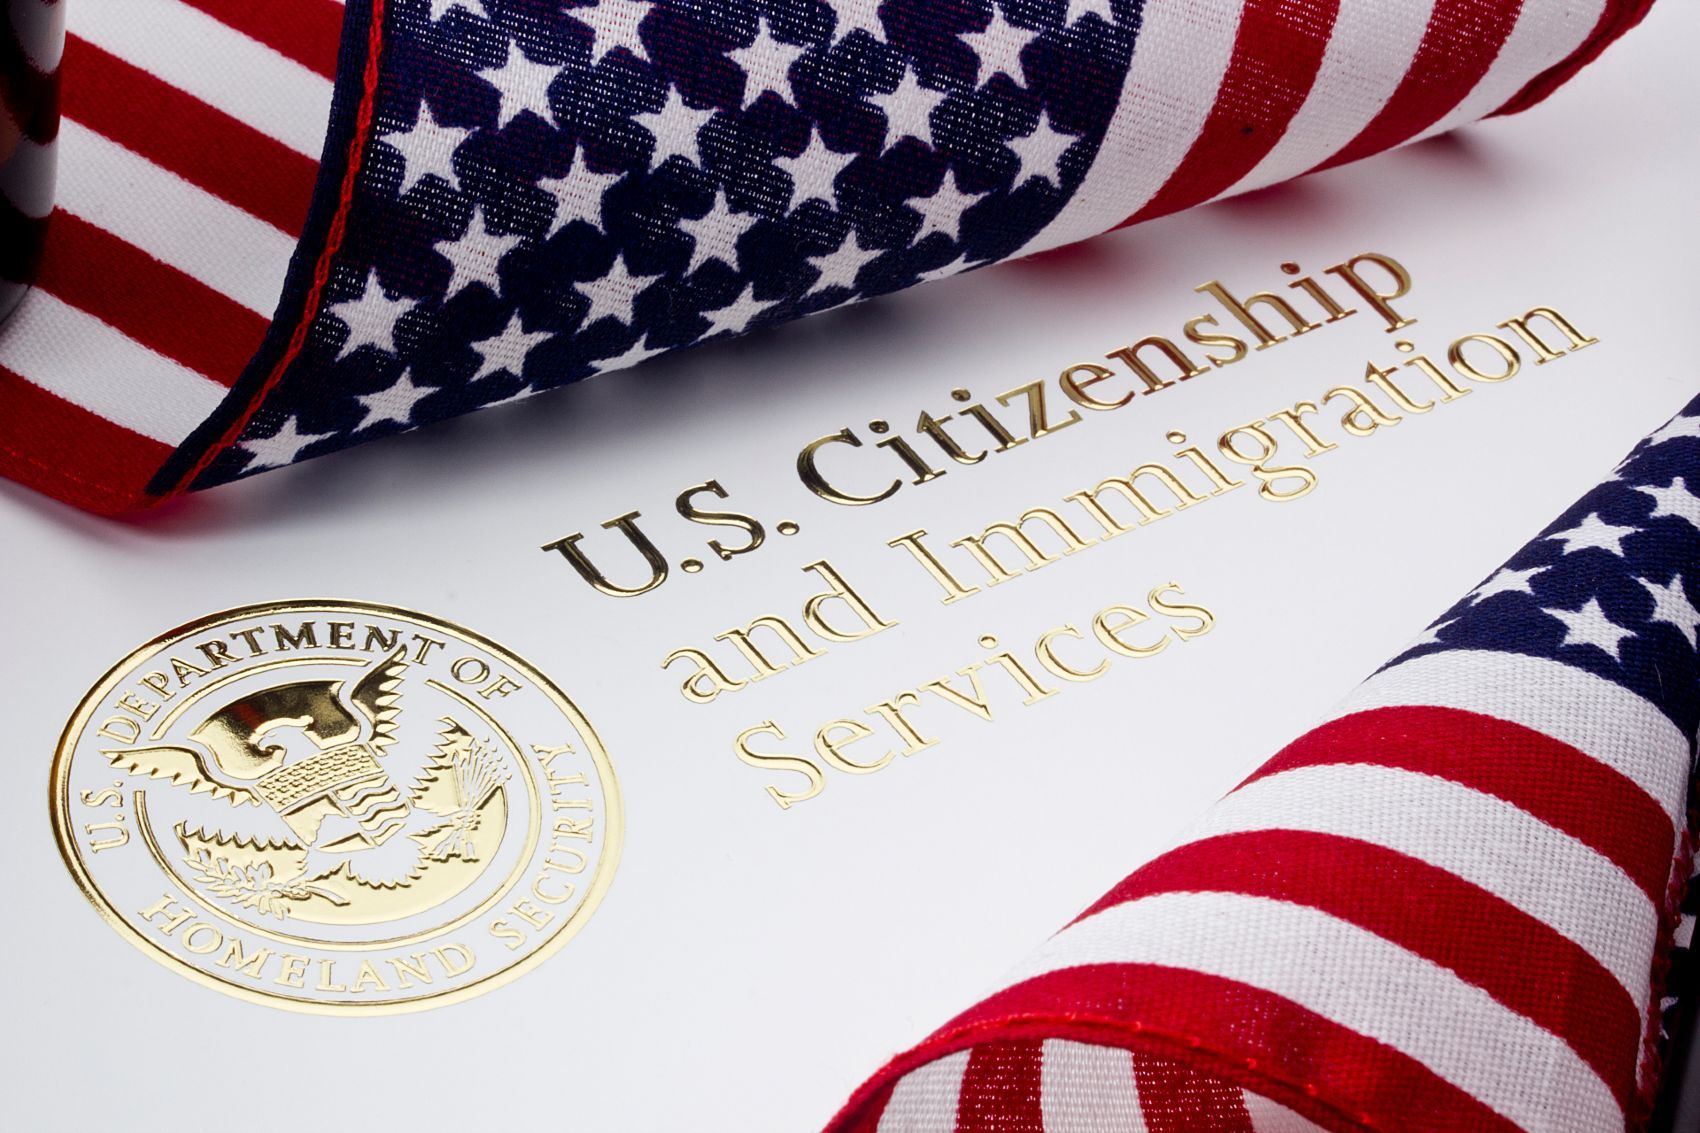 U.S Citizenship and Immigration Services letterhead in gold, surrounded by U.S. flag - uscis